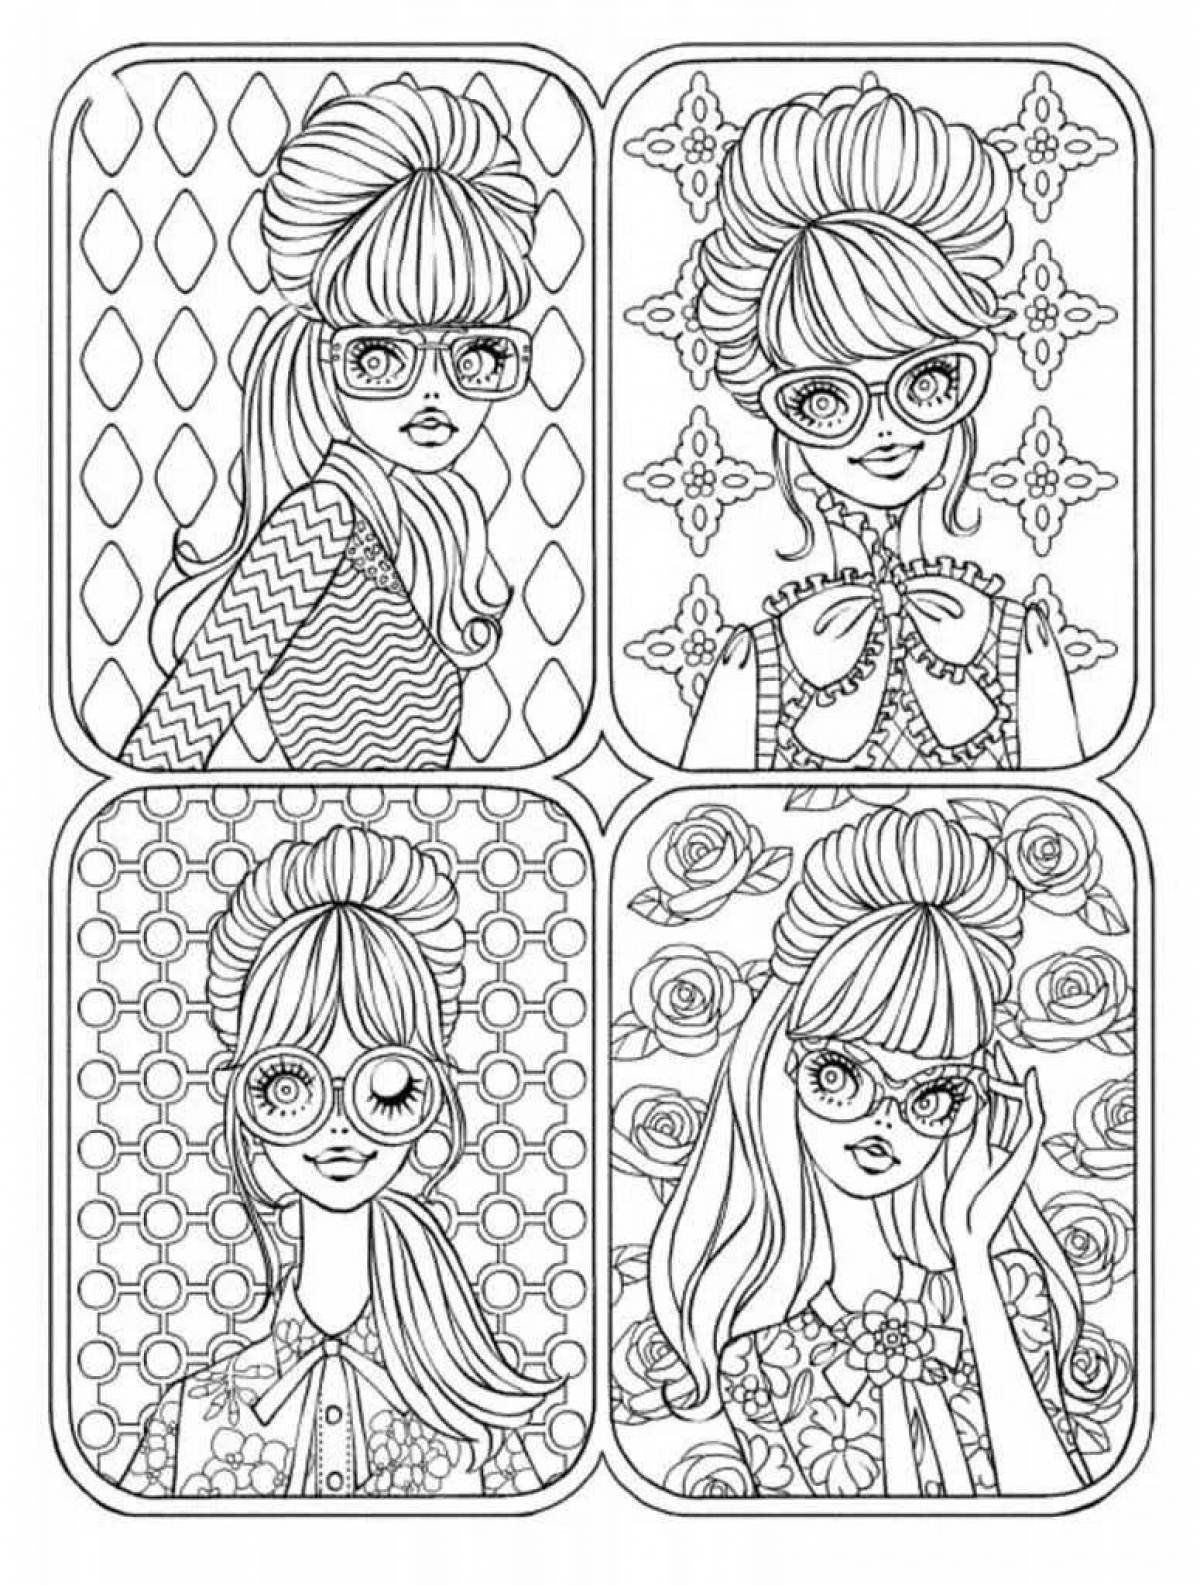 Fashionable coloring book for girls of all ages